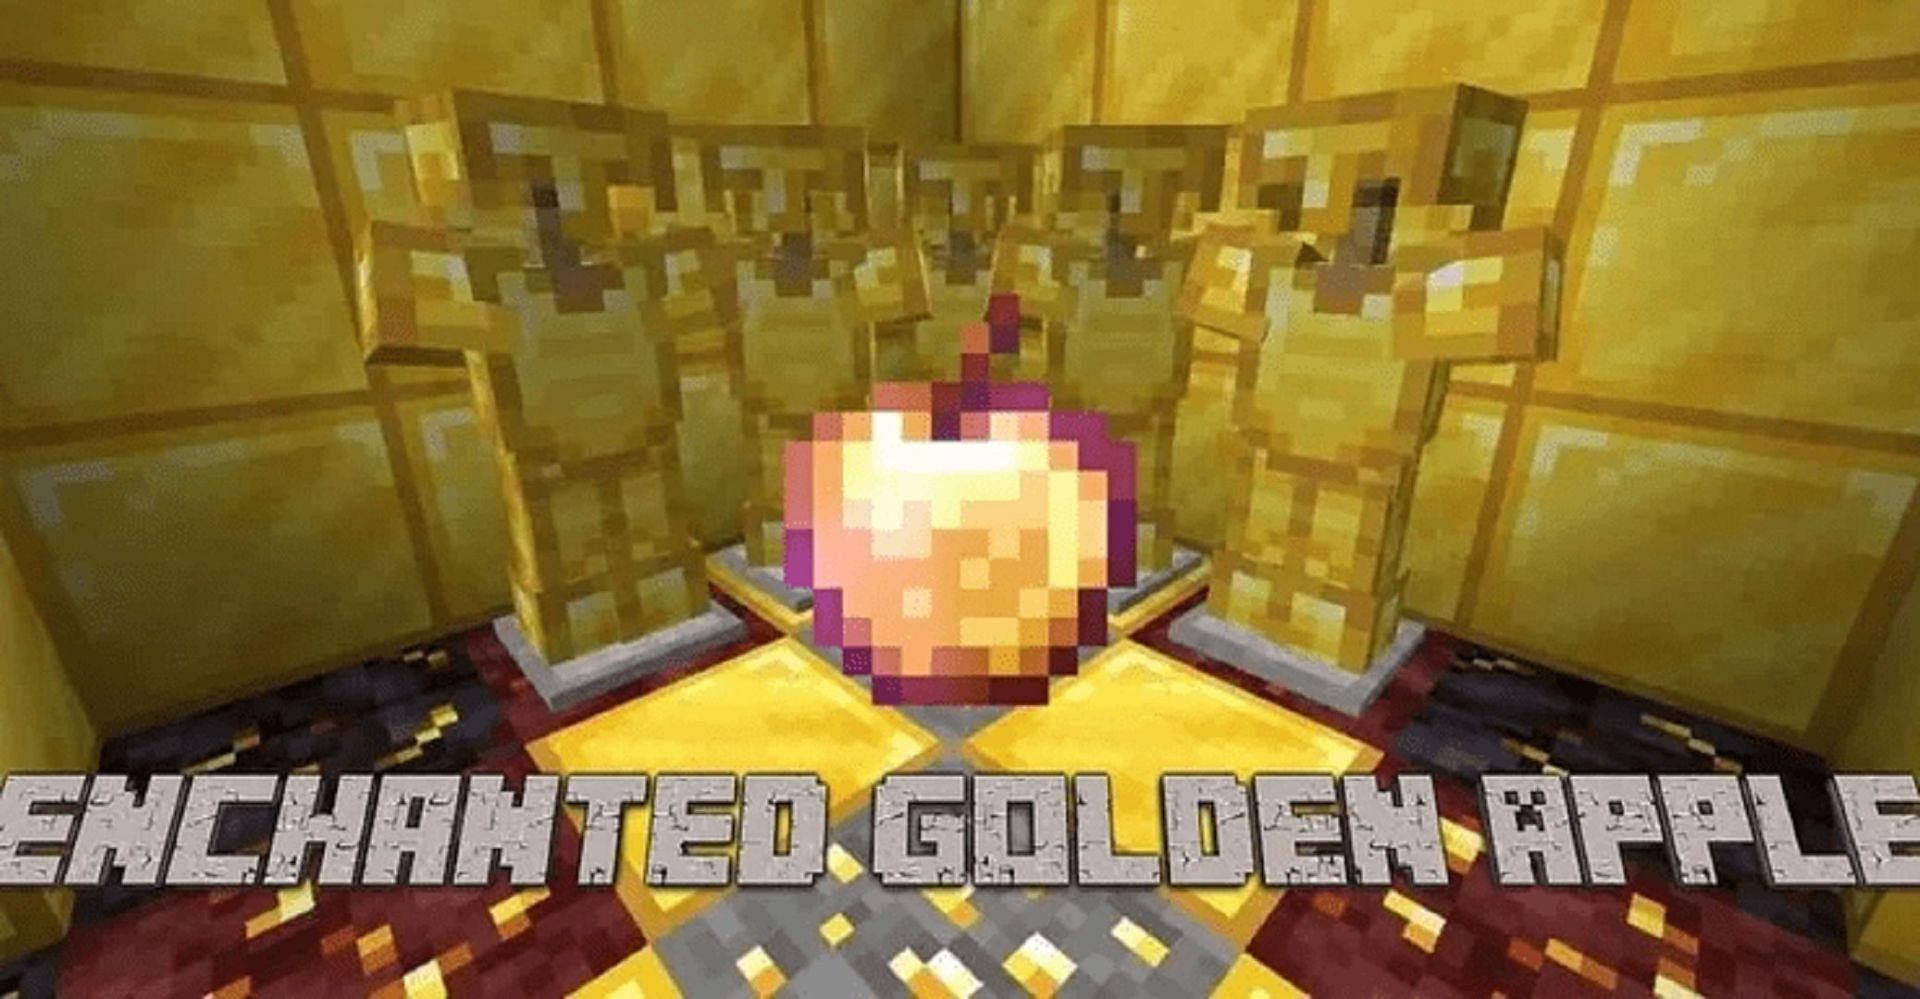 Enchanted golden apples are one of the finest food items in all of Minecraft (Image via Mojang)